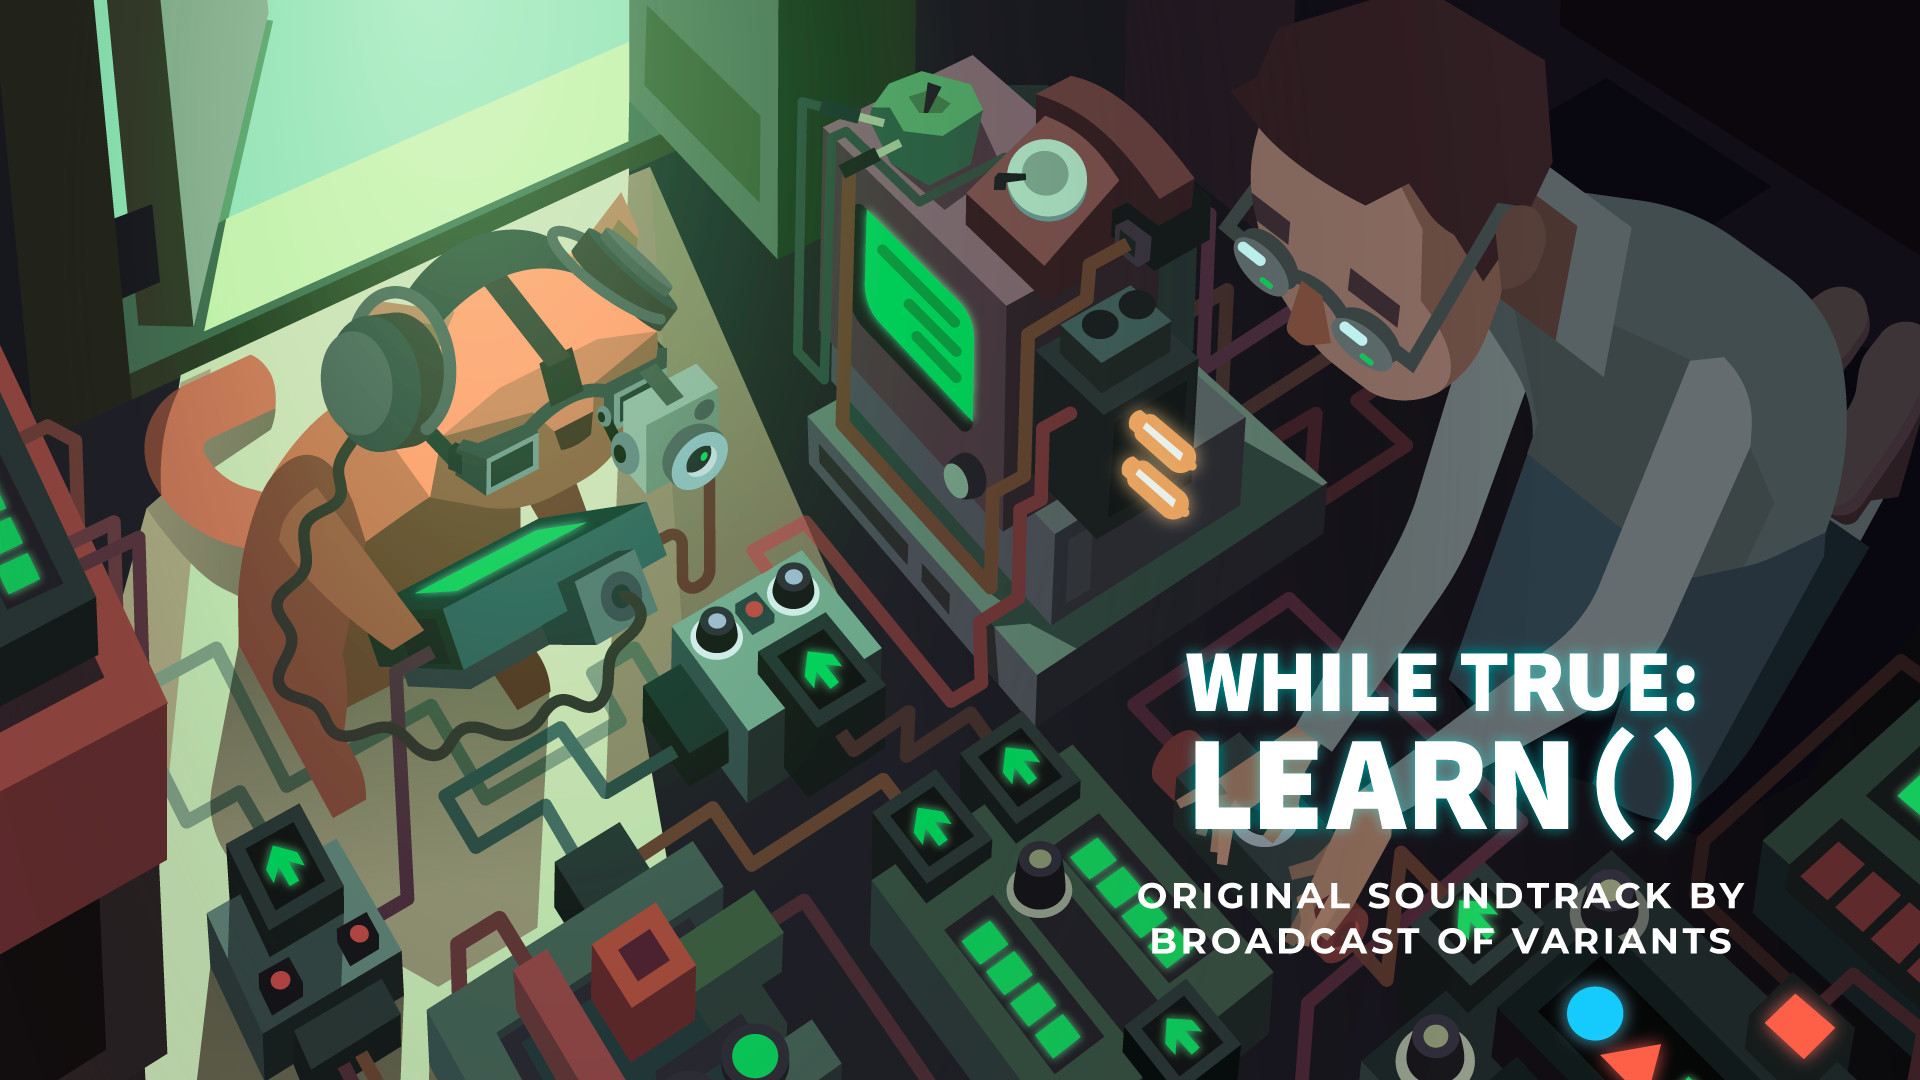 [$ 0.45] while True: learn() - Soundtrack DLC Steam CD key